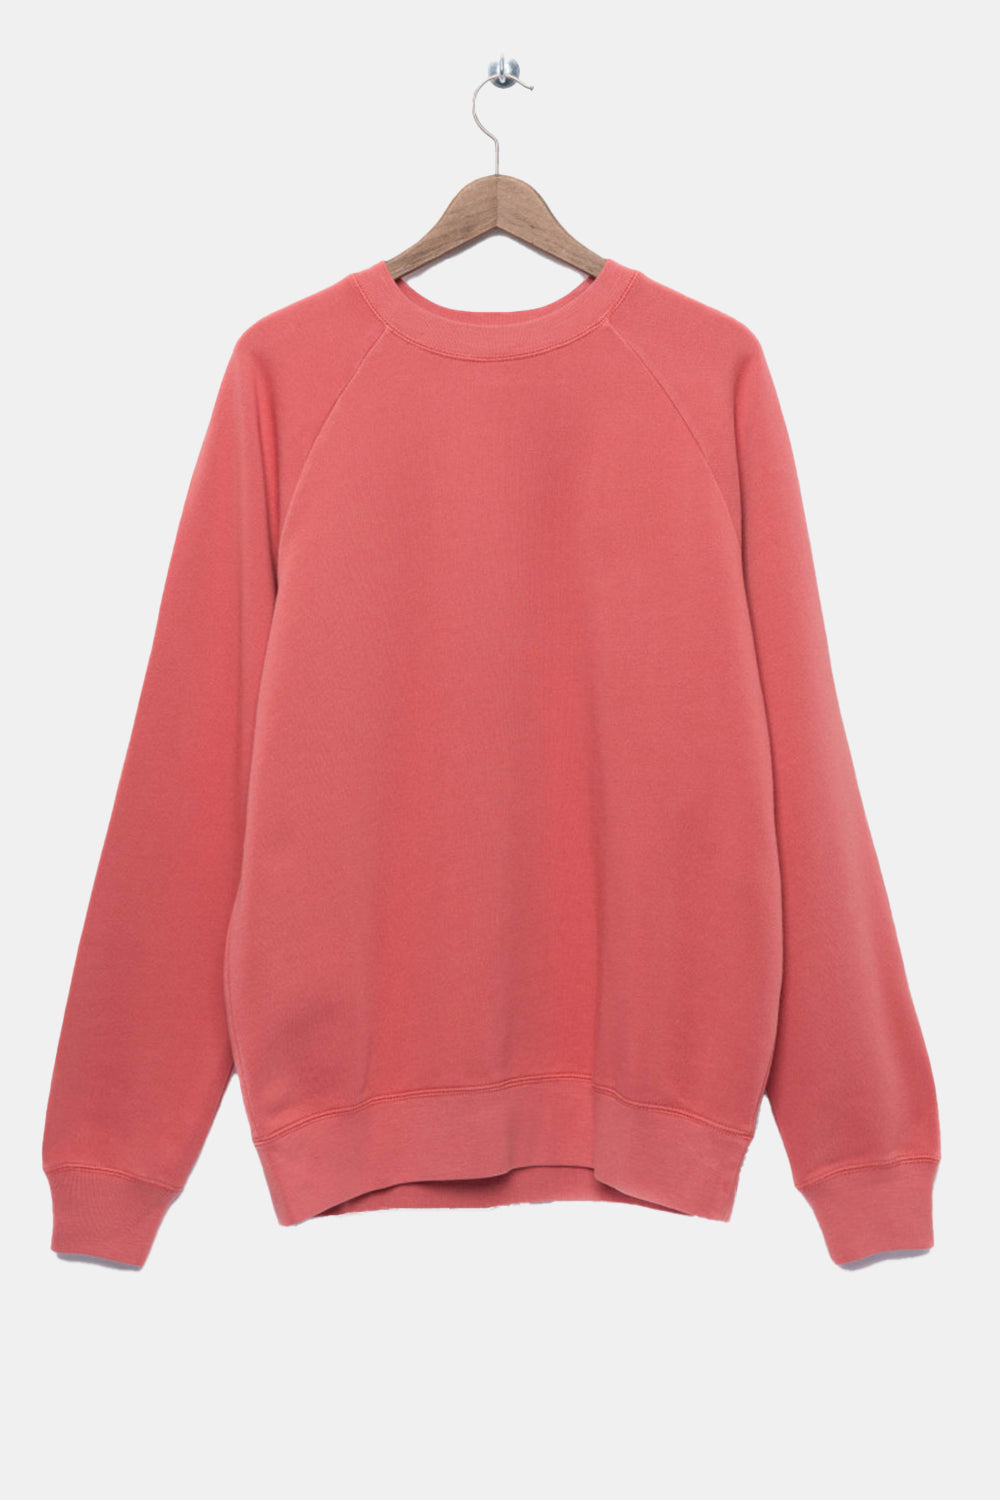 La Paz Cunha Sweatshirt (Spiced Coral Pink) | Number Six